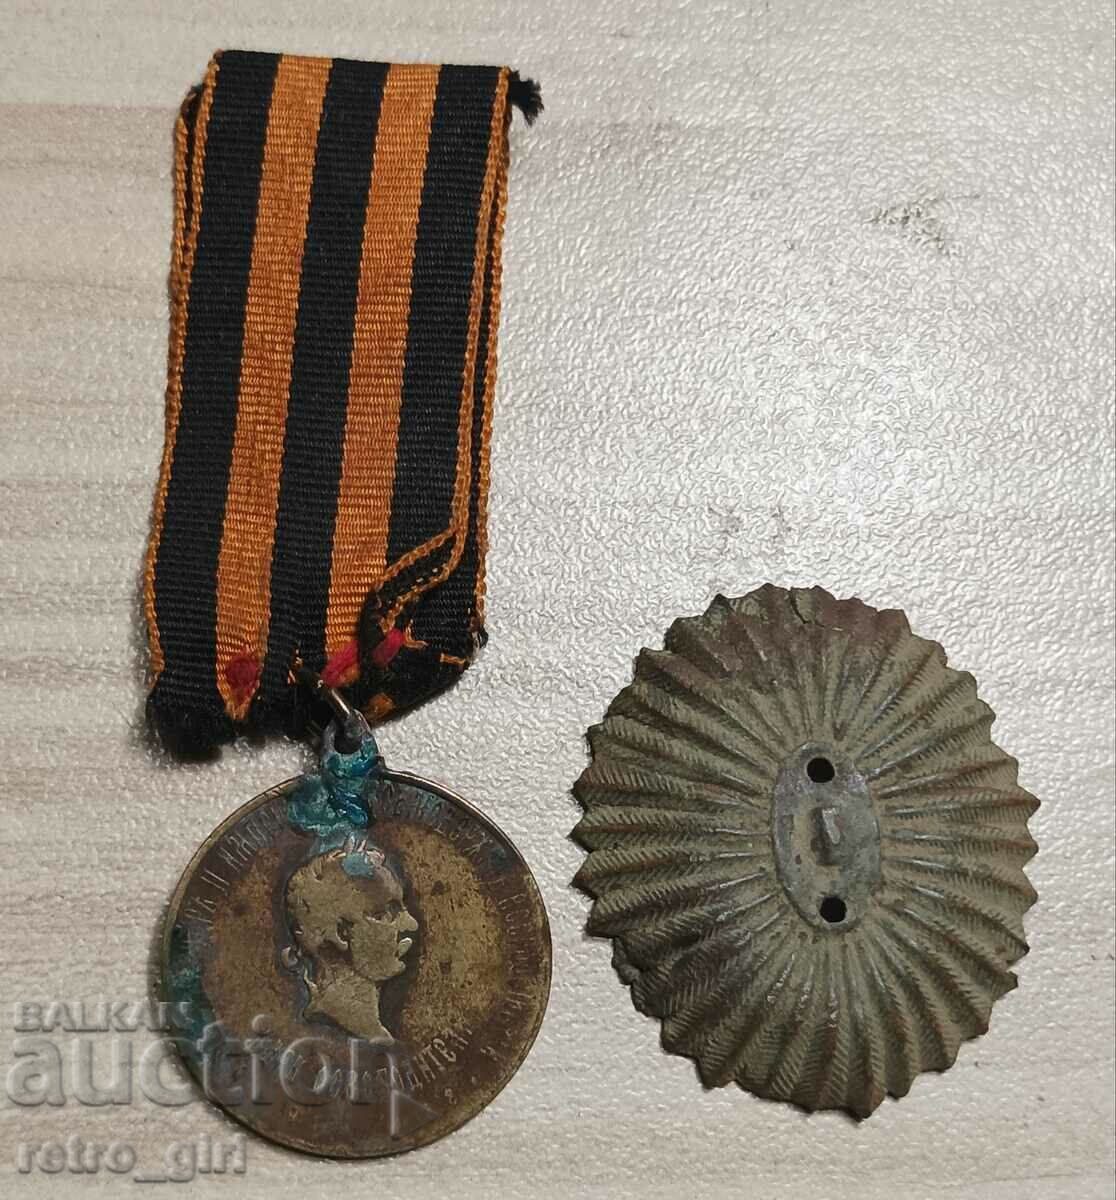 I am selling a militia medal and part of the cockade